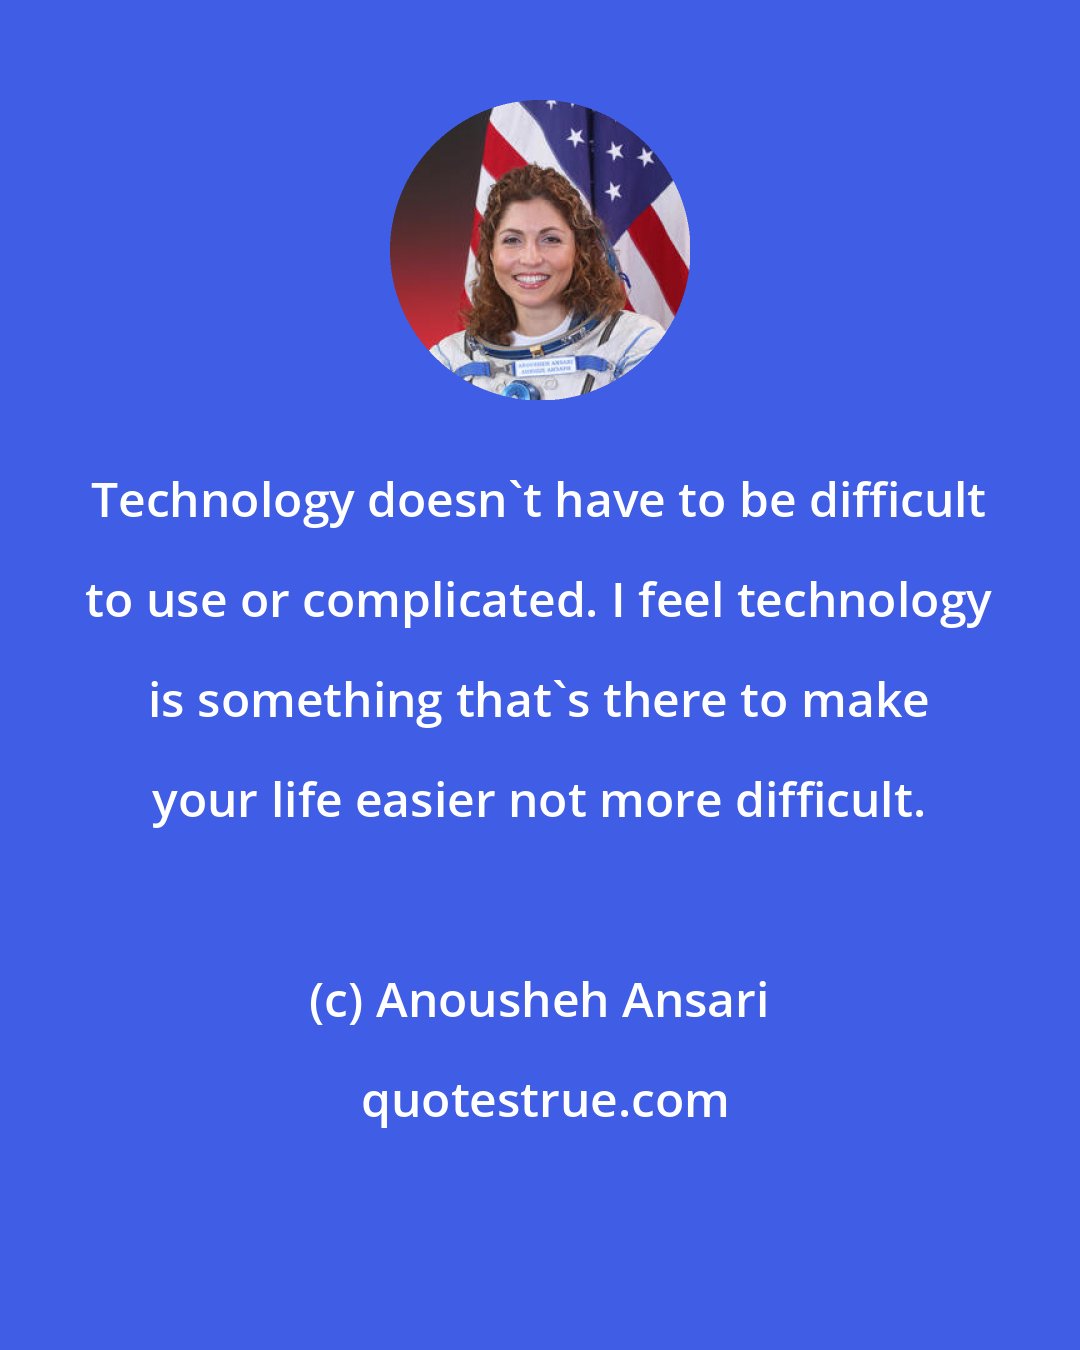 Anousheh Ansari: Technology doesn't have to be difficult to use or complicated. I feel technology is something that's there to make your life easier not more difficult.